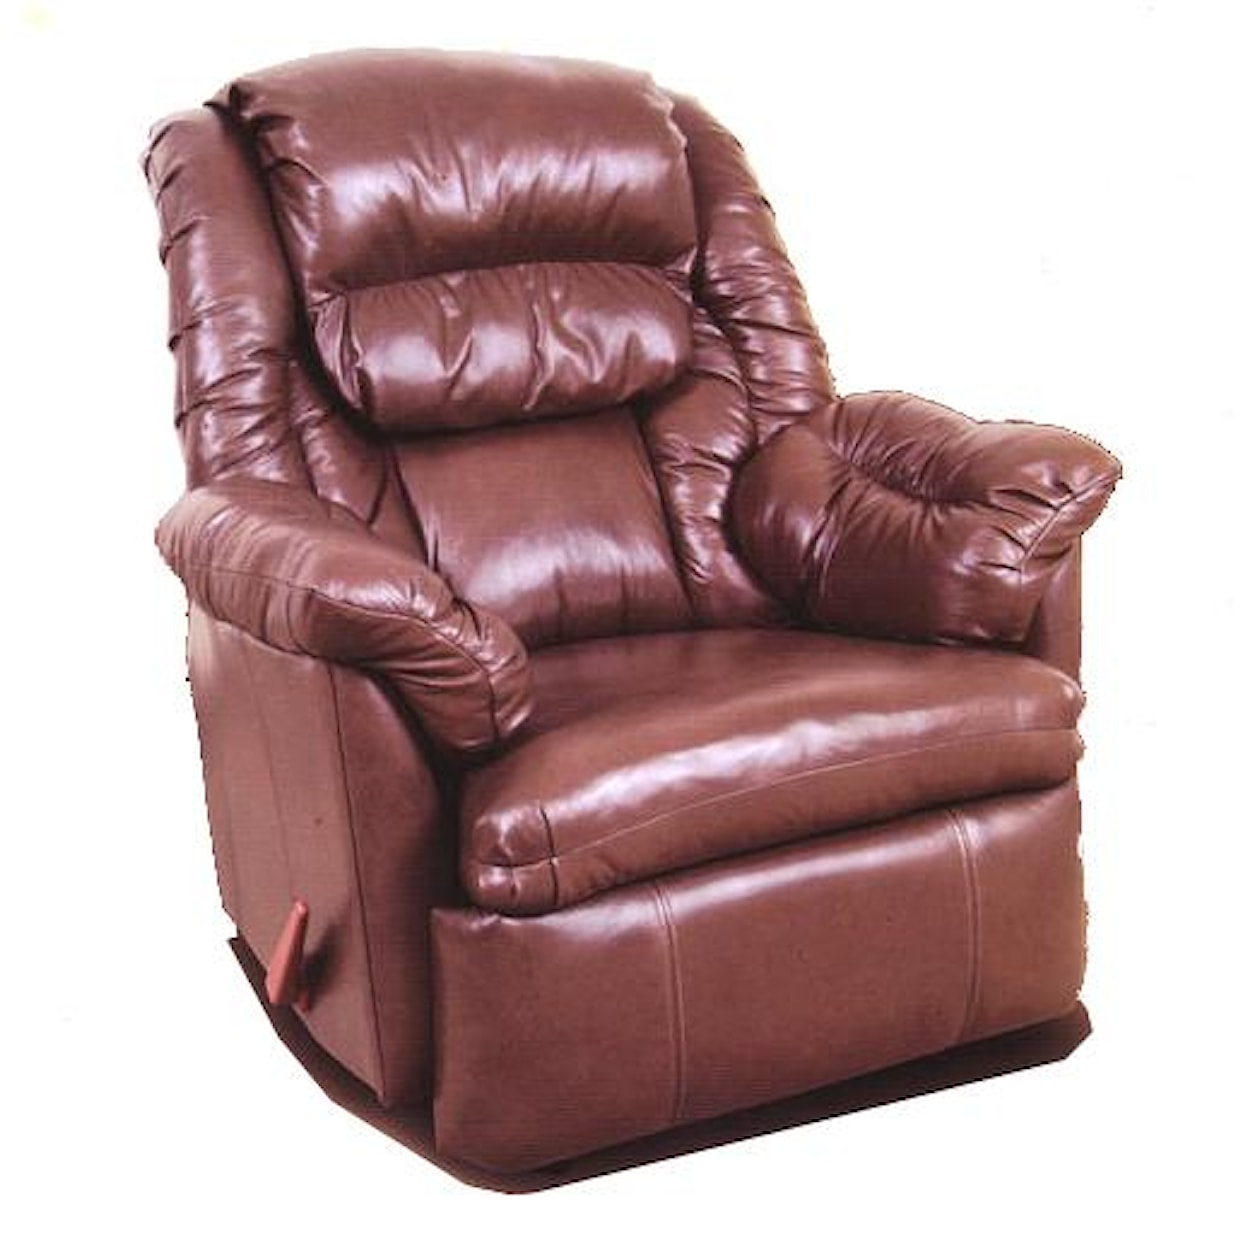 Ort Manufacturing Reserve Seating 100% Leather Rocker Recliner w/ Coil Seating